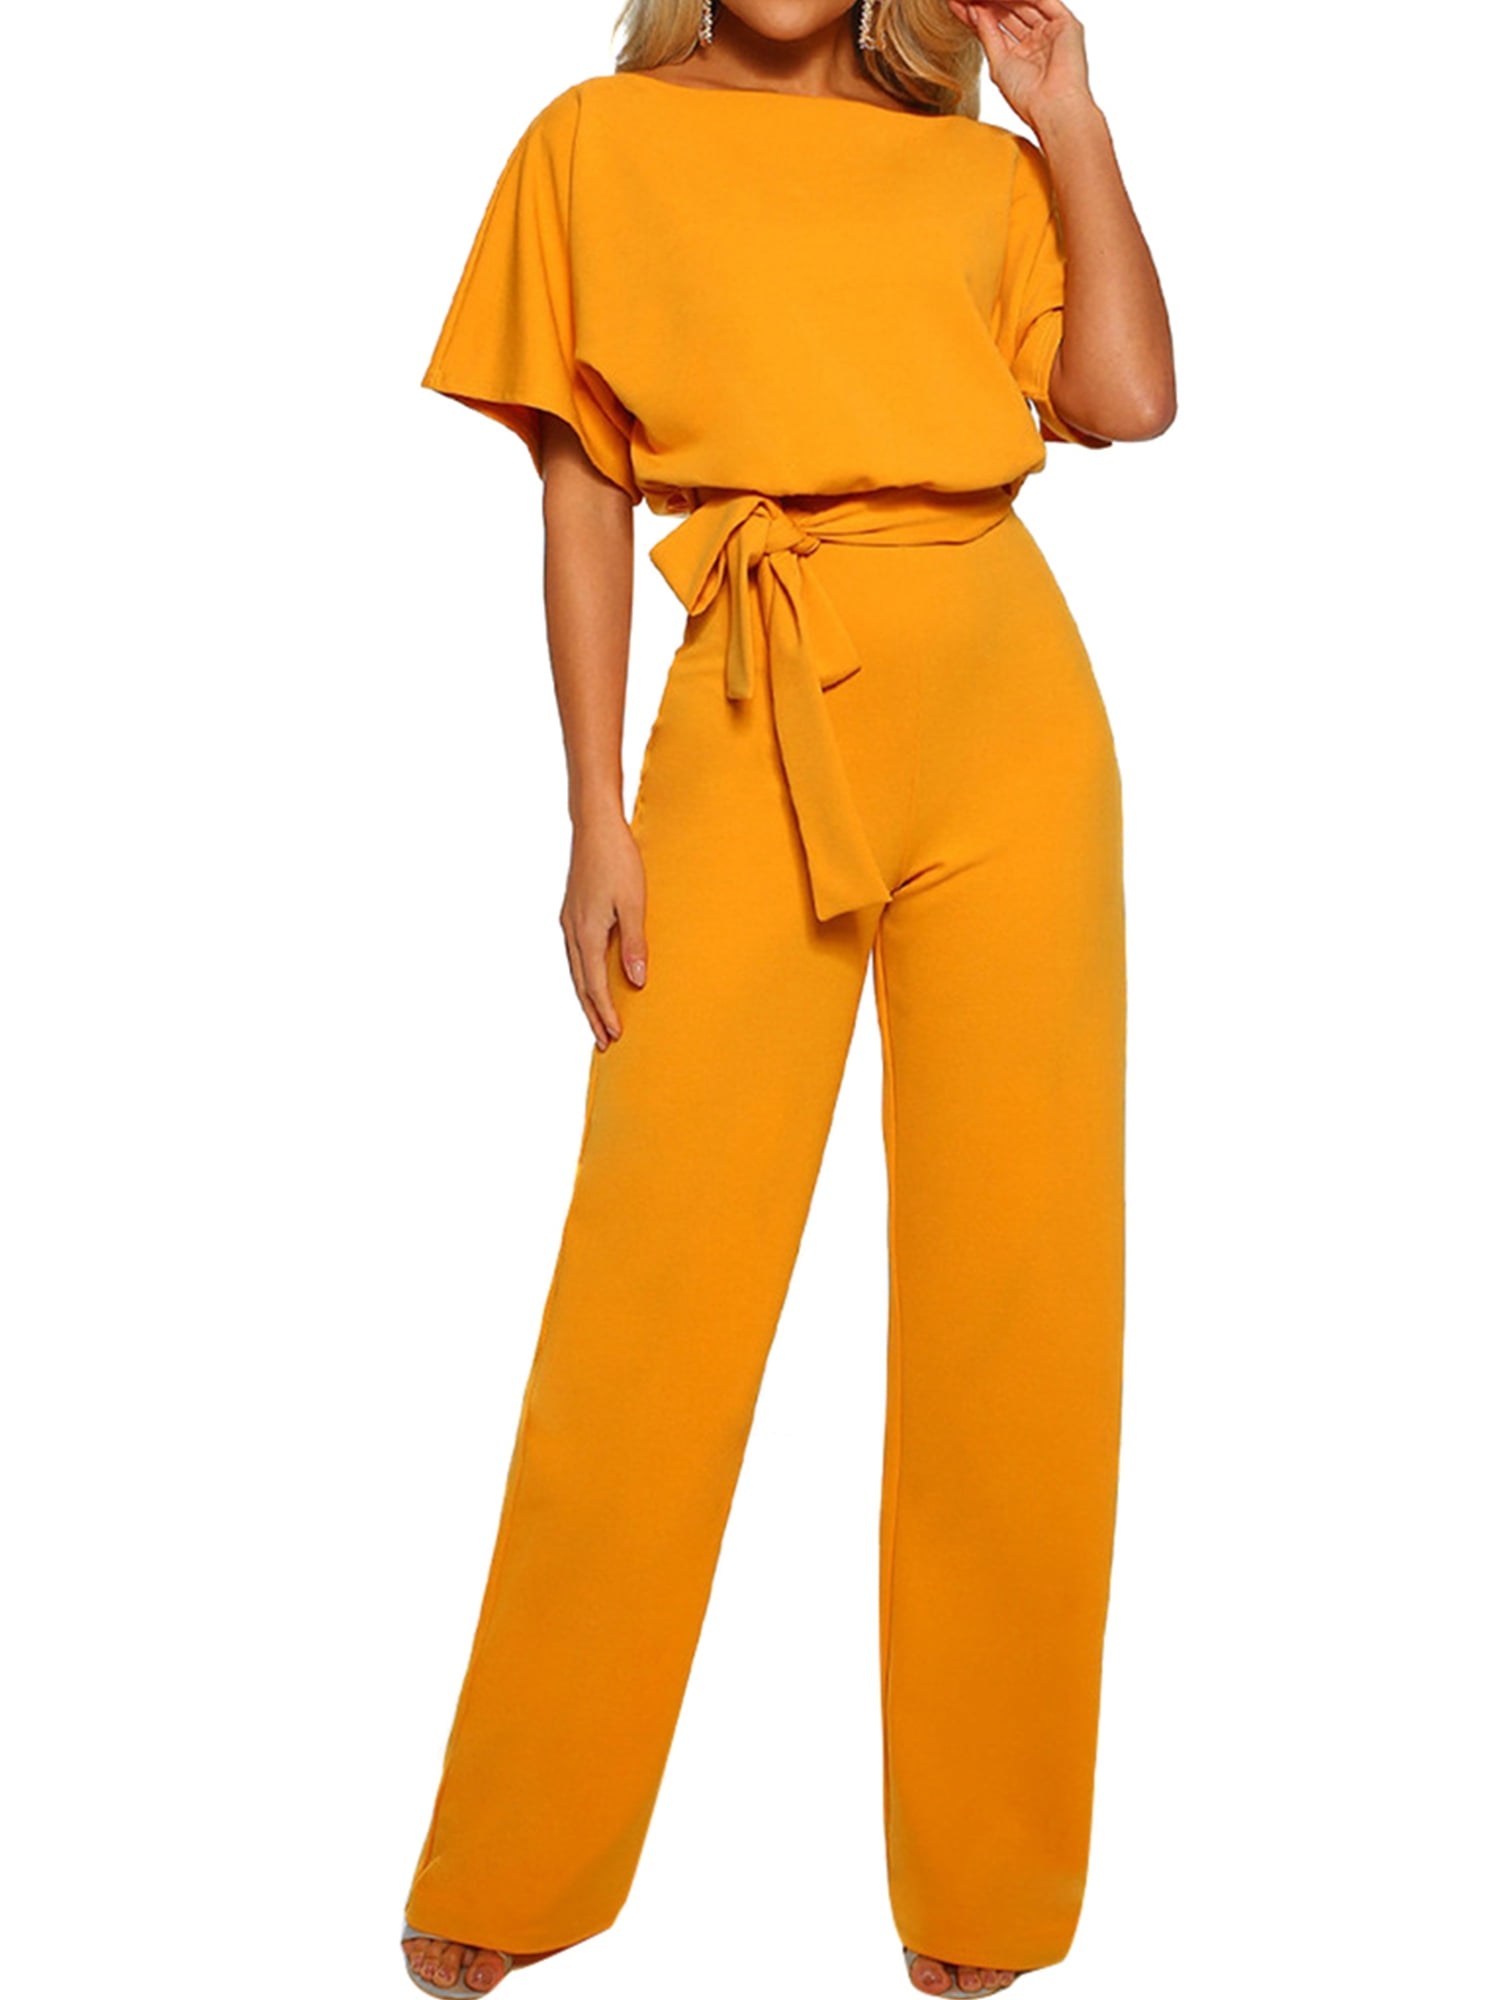 Women Casual Short Sleeve Jumpsuit Rompers Summer Playsuit Clubwear Straight Leg Overalls Jumpsuit with Belt 